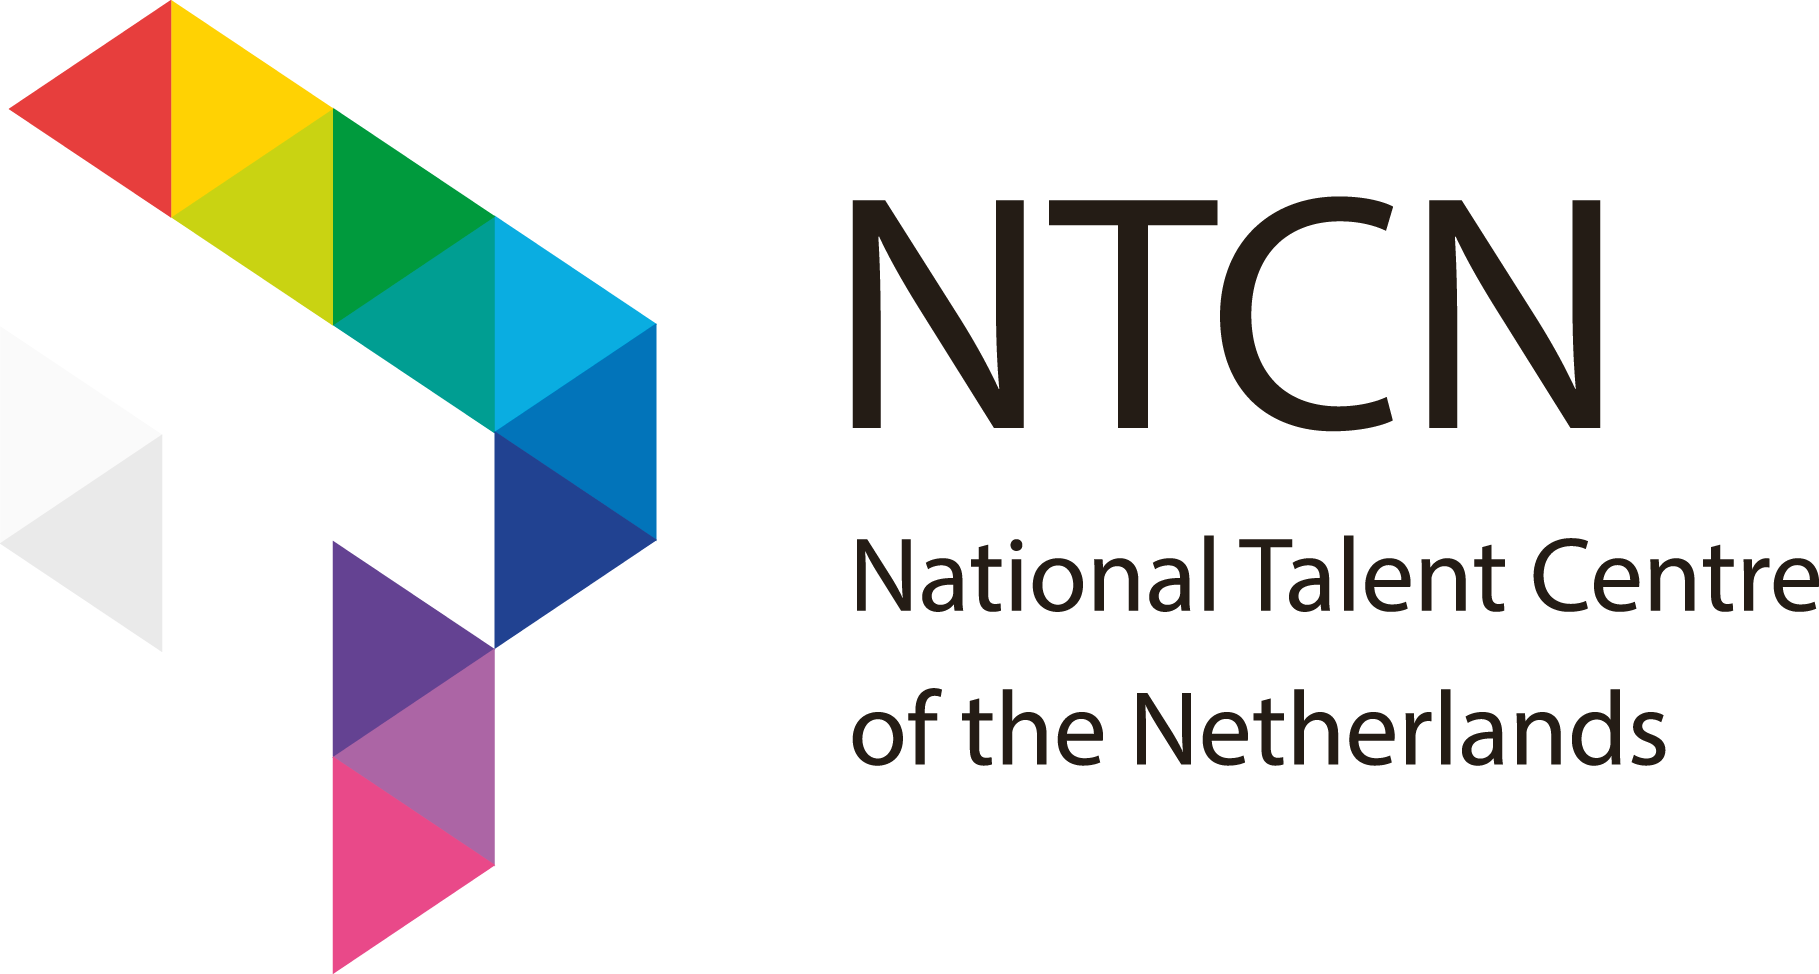 National Talent Centre of the Netherlands